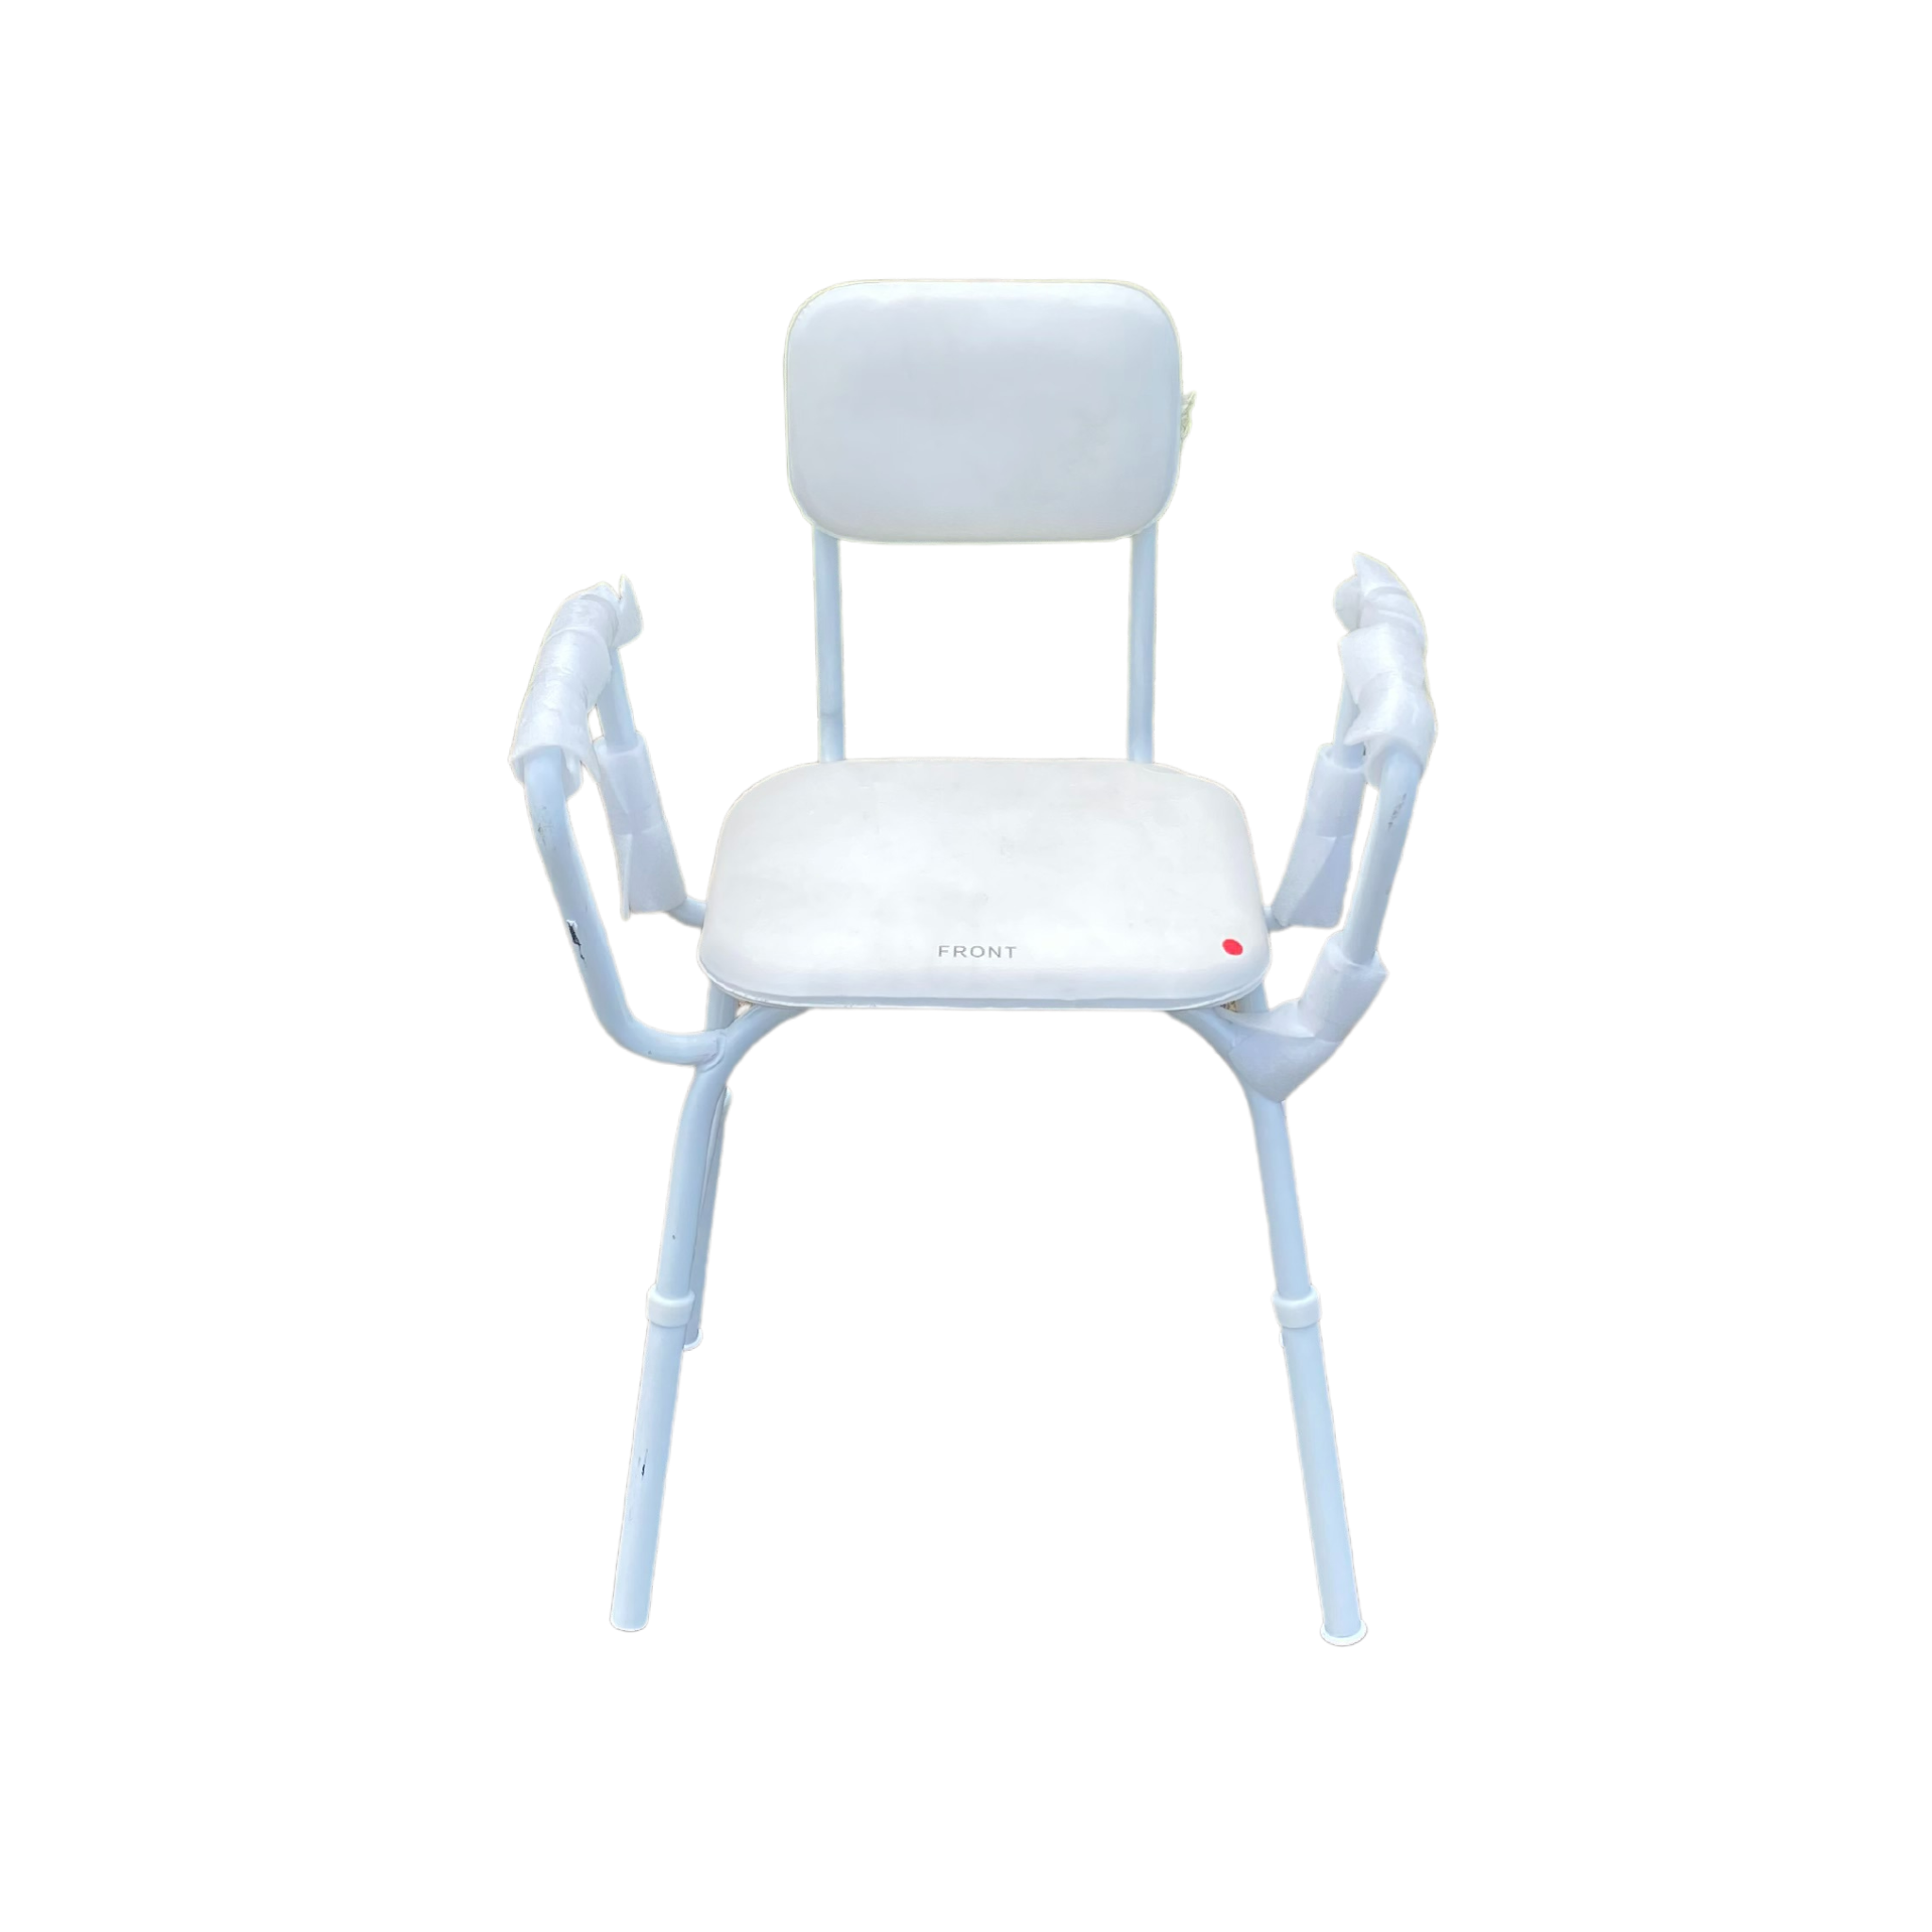 Rental - Shower Perching Stool, Padded with Backrest from Aged Care and Medical - Shower Stool for hire for aged care